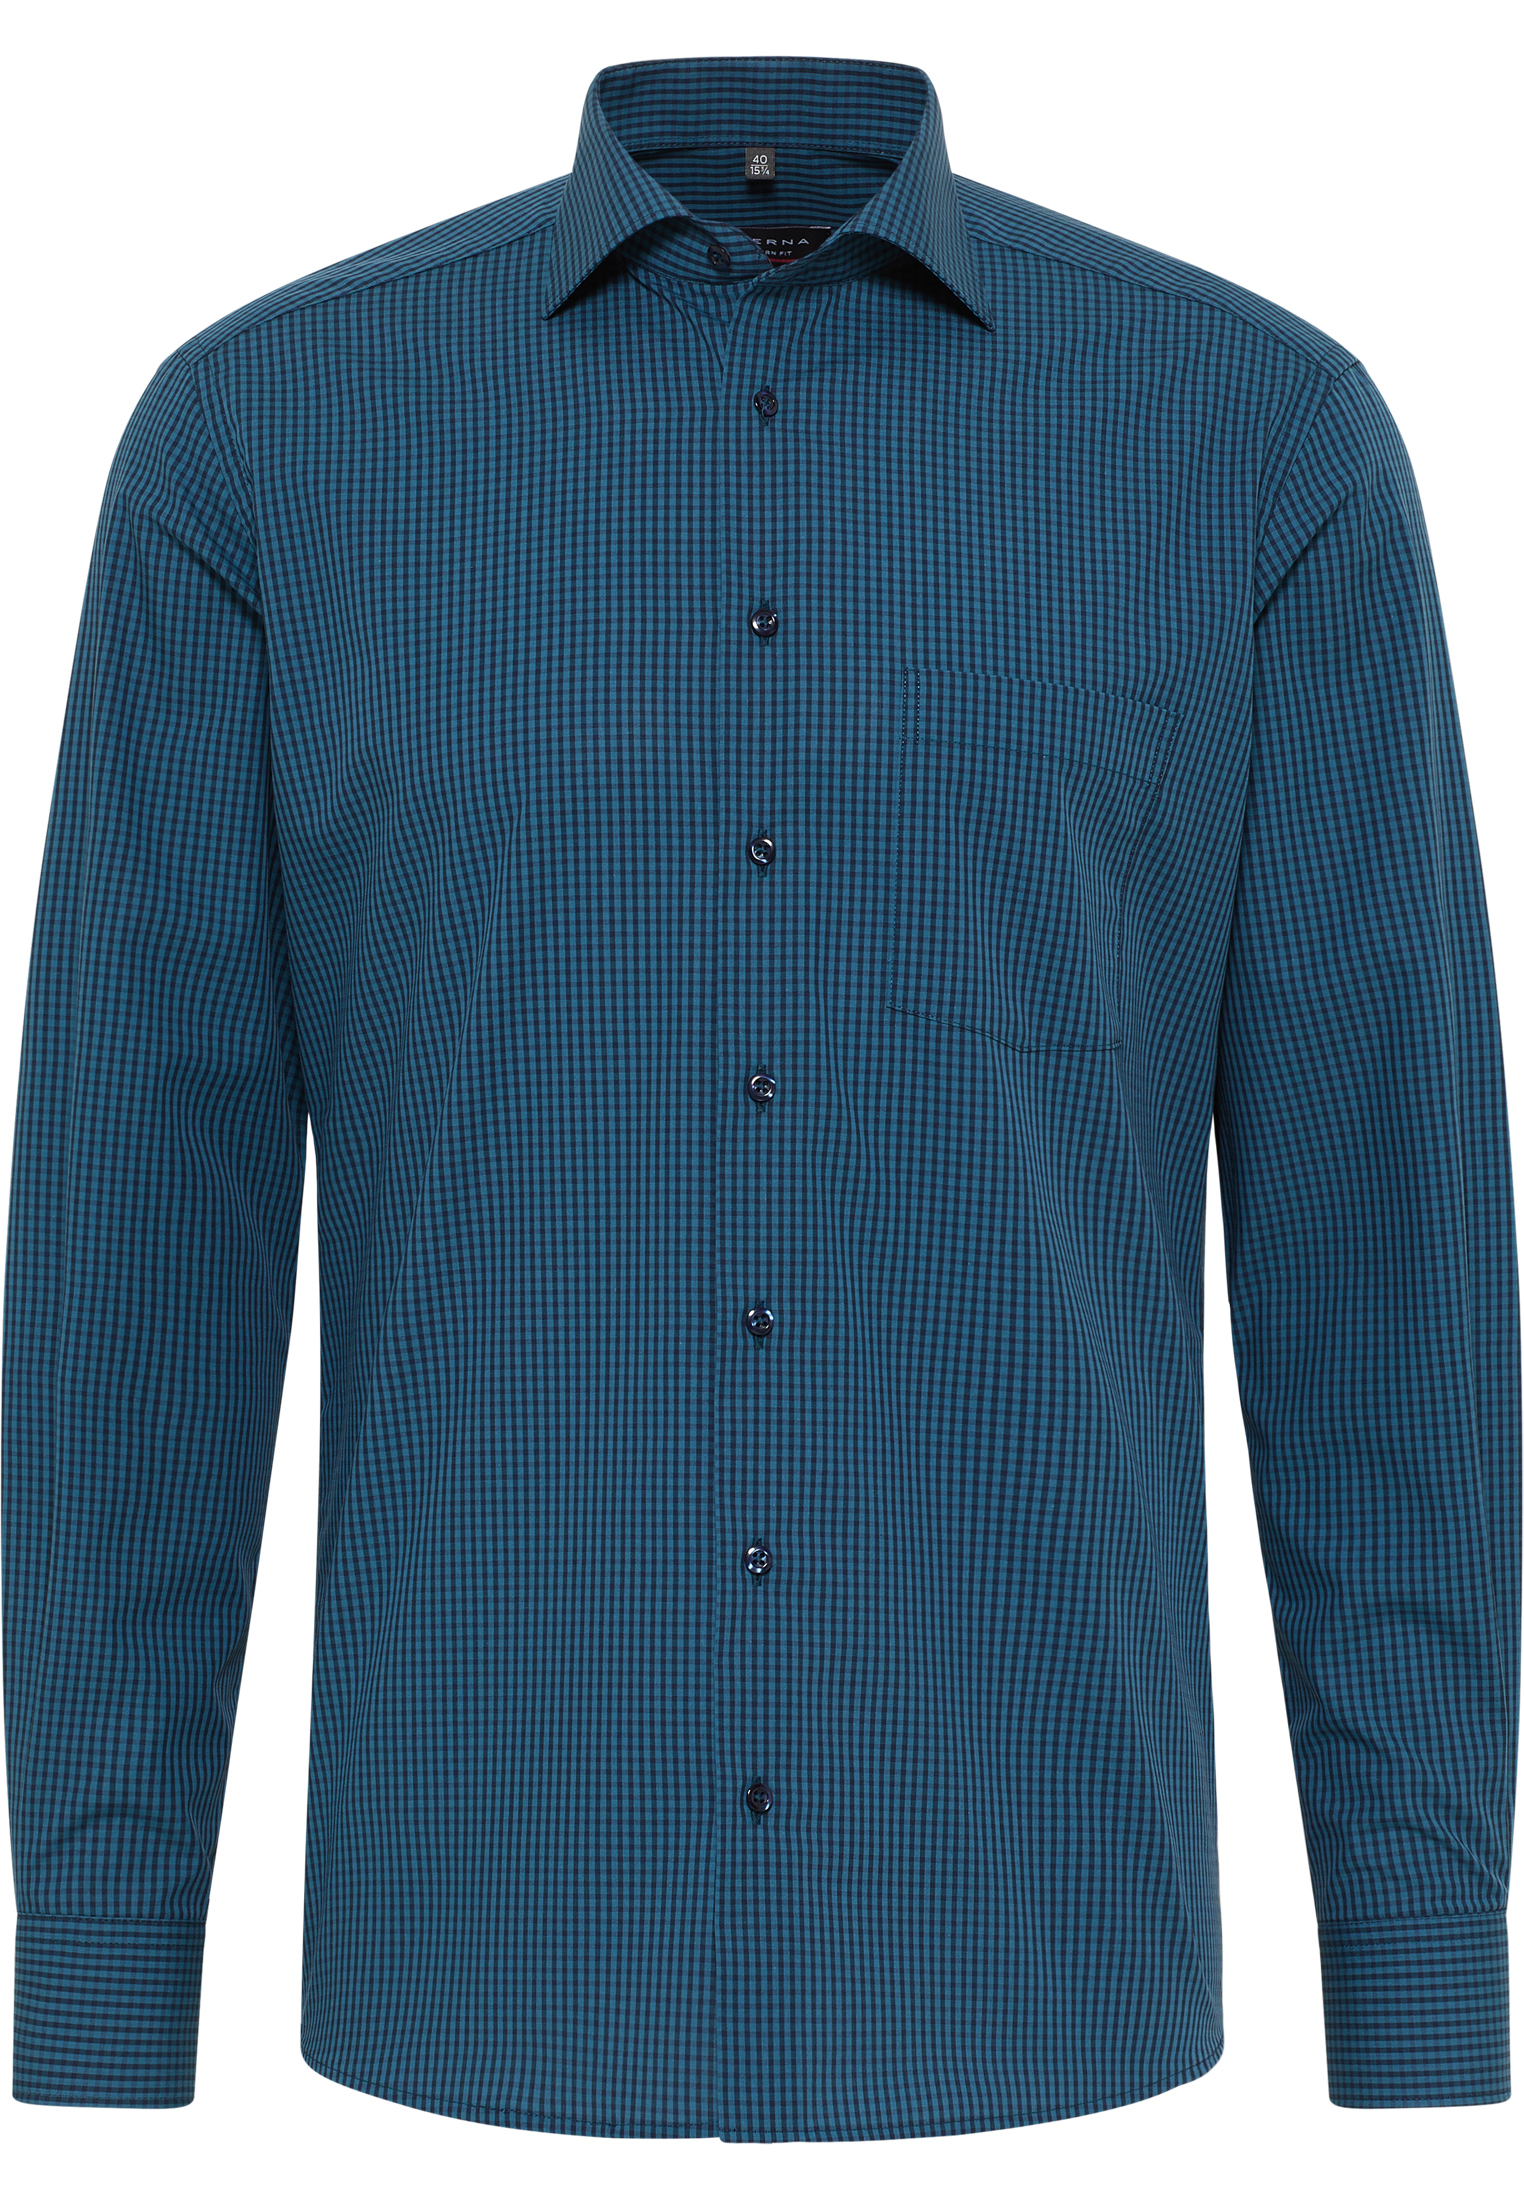 MODERN FIT Shirt in petrol checkered